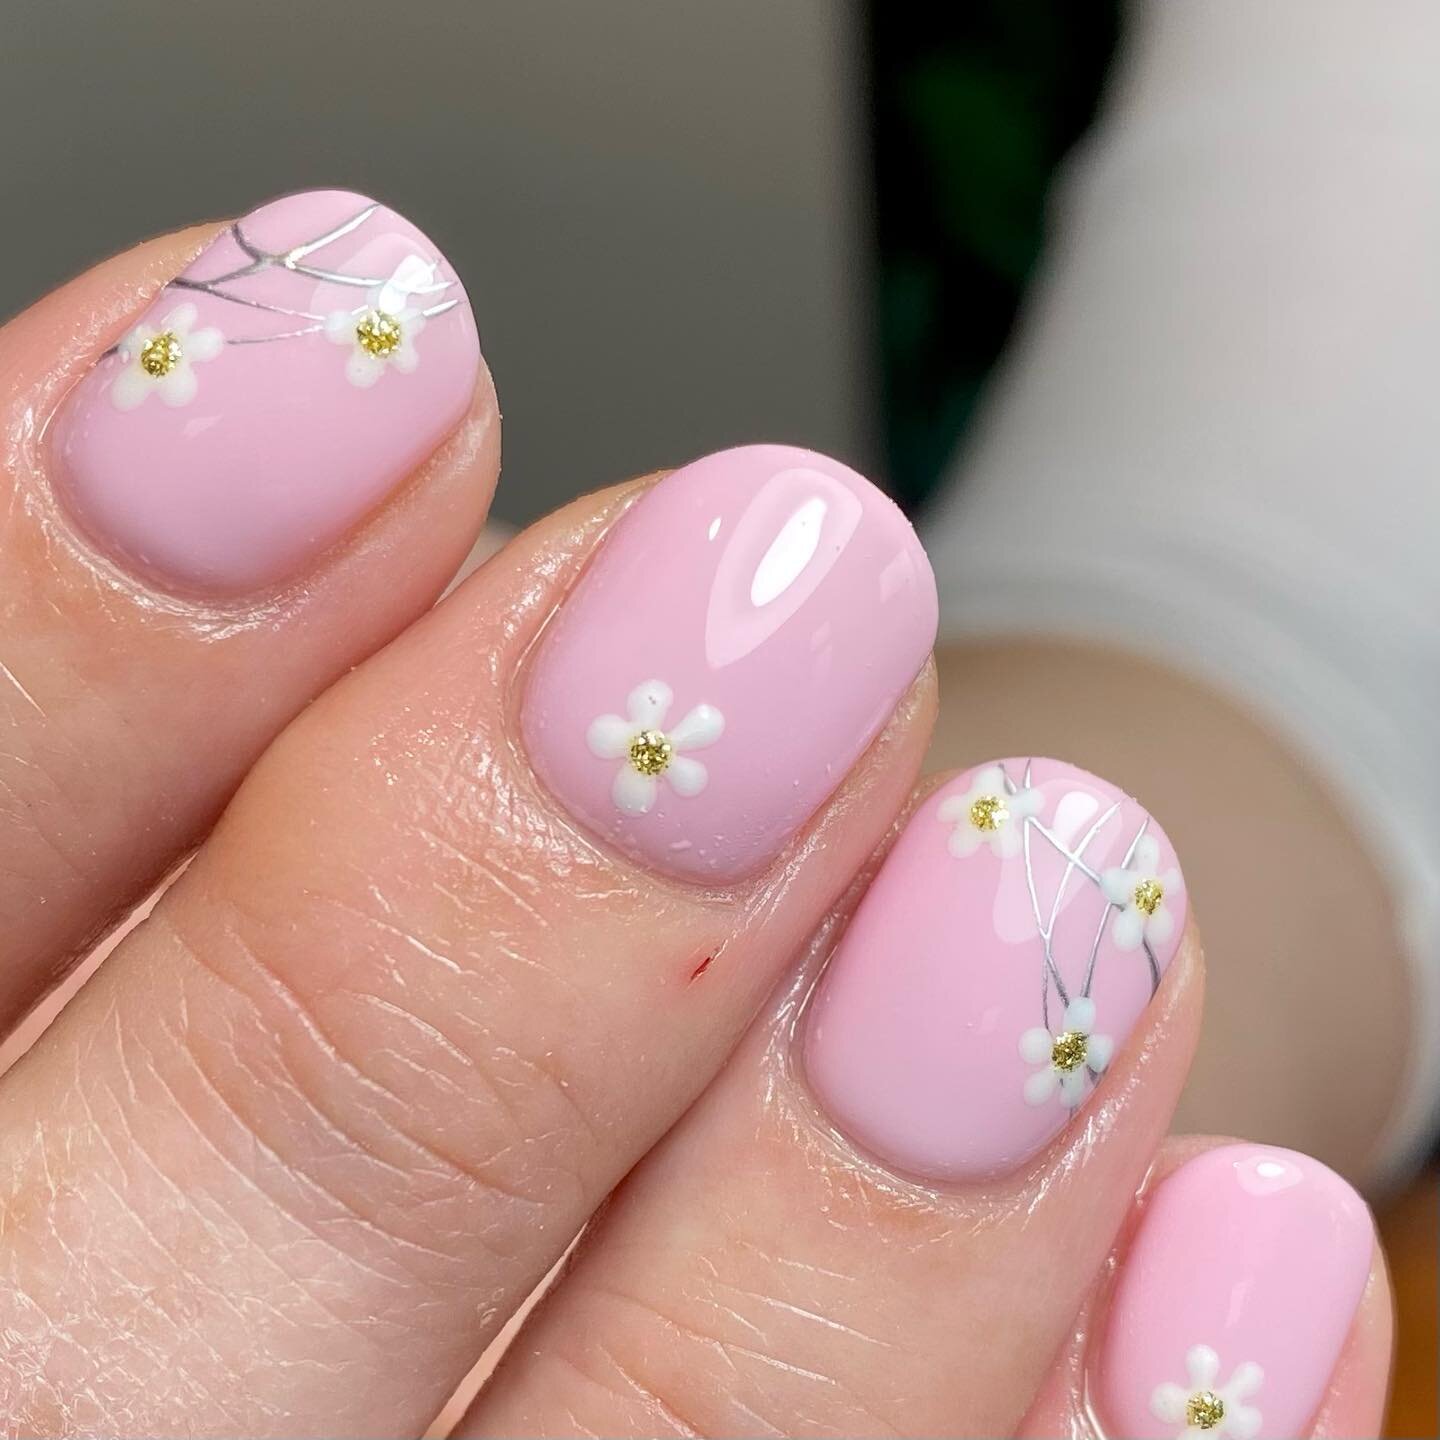 Loves me, loves me not, loves me&hellip;🌼

Cute little Daisy&rsquo;s on #tgbjune 
With some studio gel #mirrorchrome @thegelbottleireland @the_gelbottle_inc 

#tgbstudiogel #daisynails #floralnails #springnails